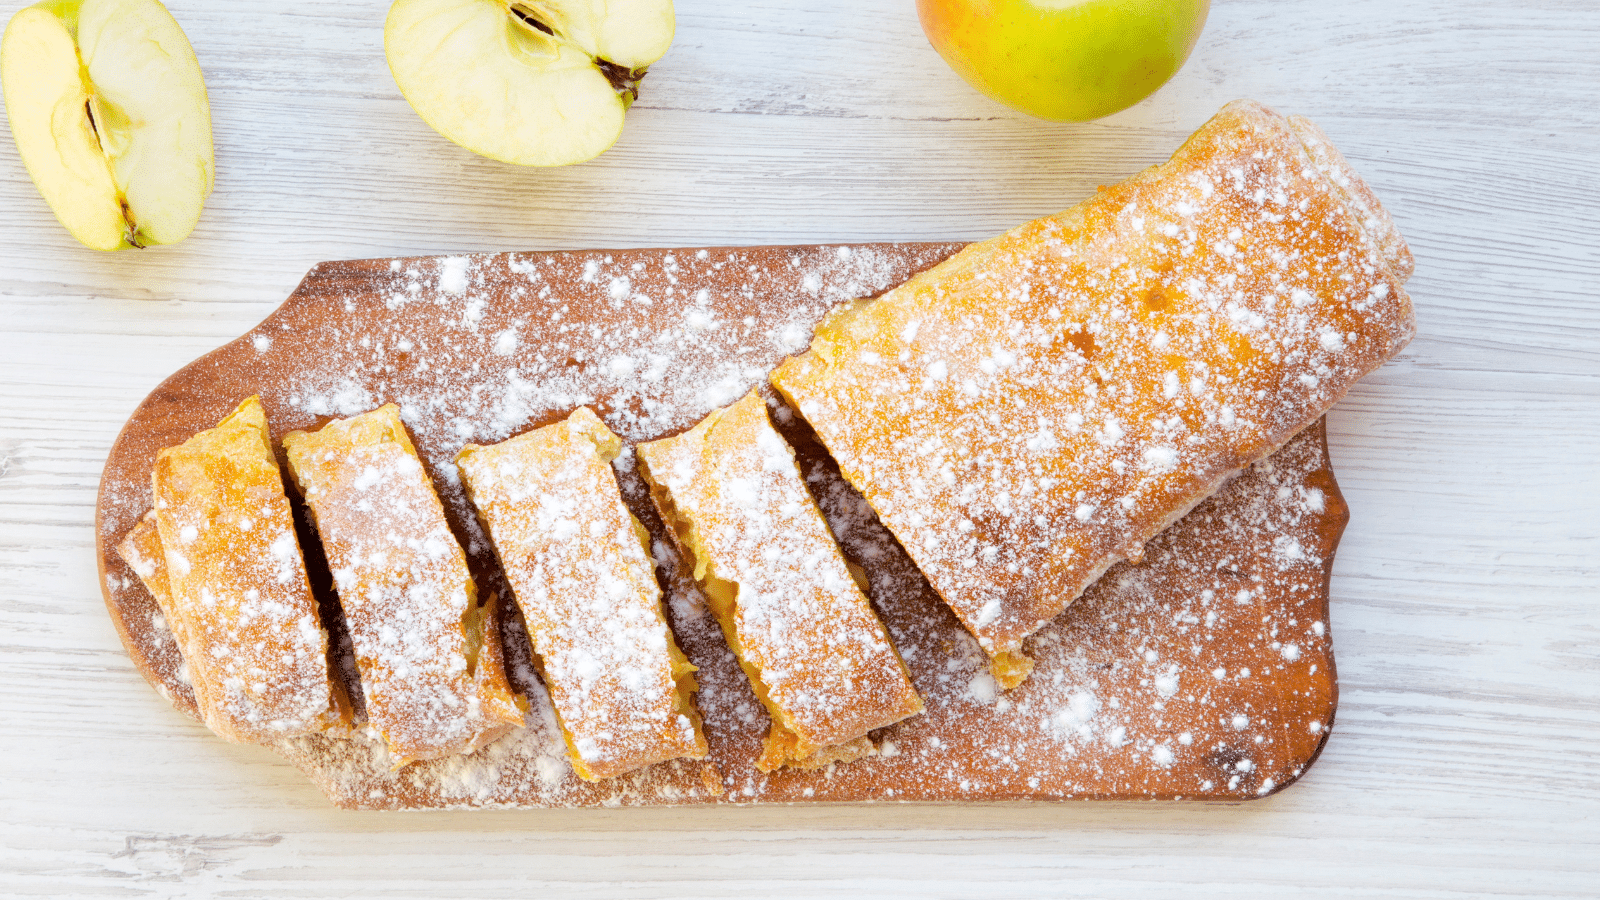 a partially sliced Caramel Apple Strudel made with puff pastry on a wooden cutting board with an apple